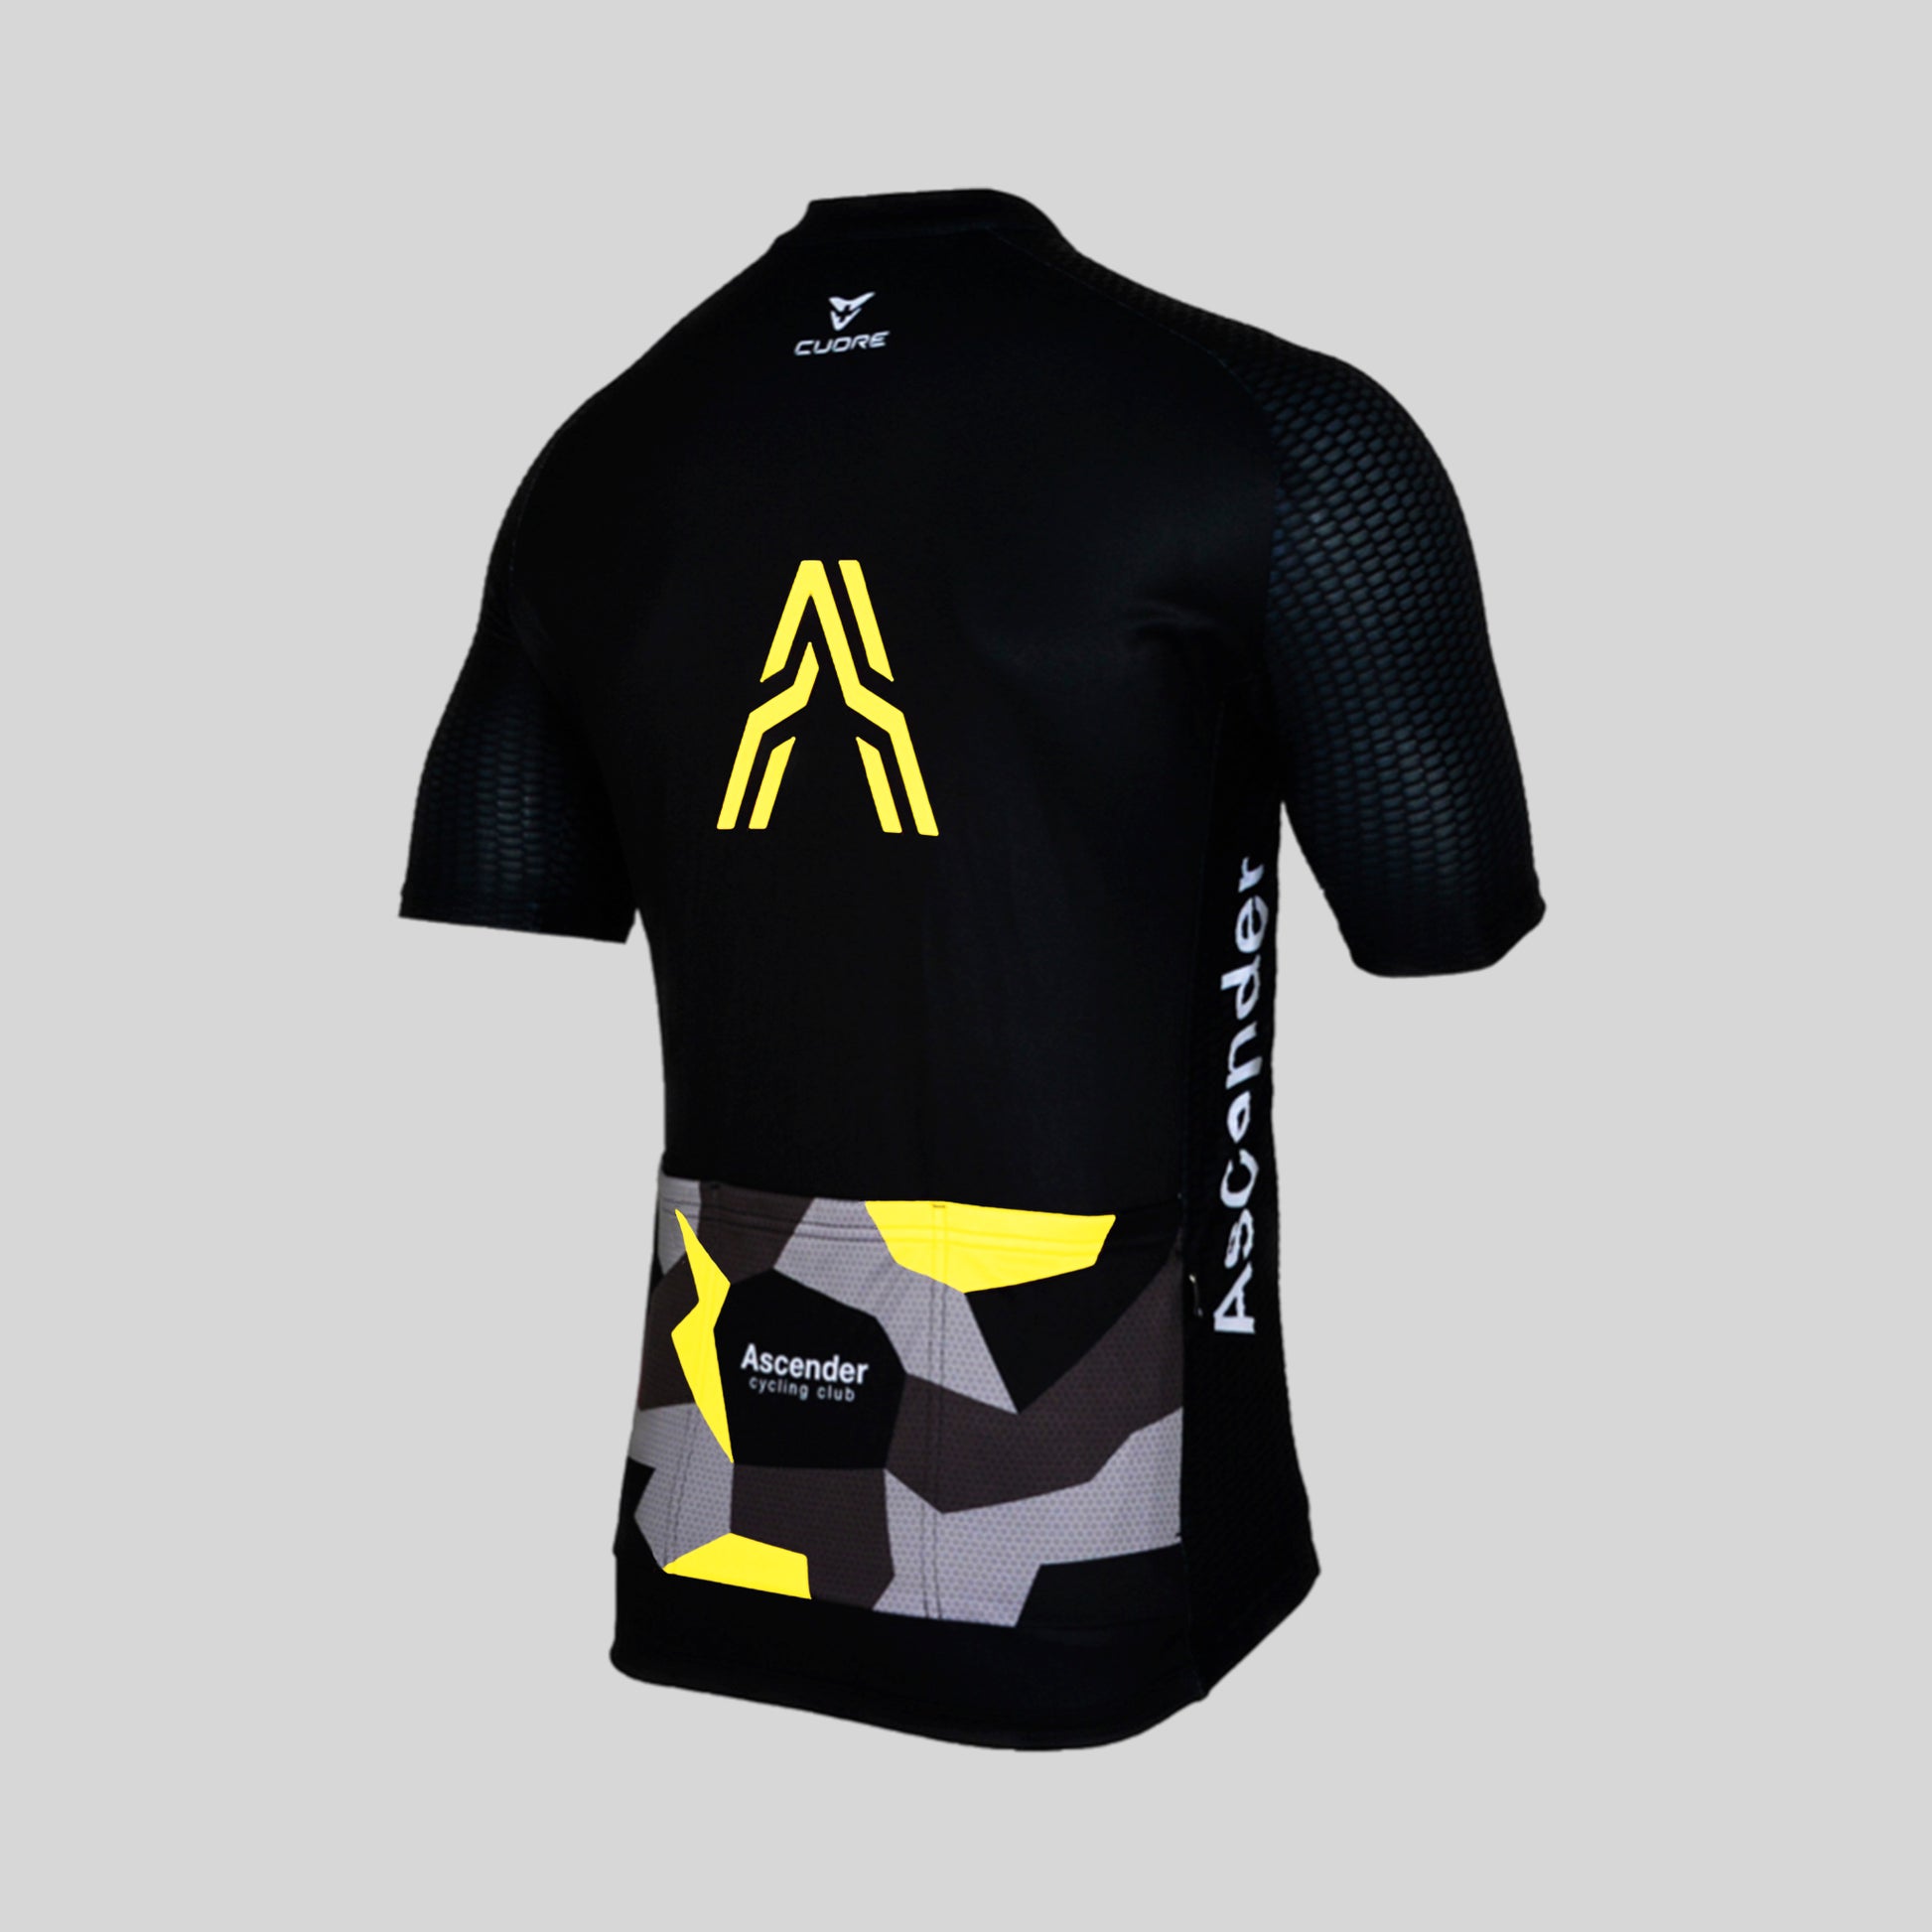 Lightning Bolt Camo Neon Yellow Short Sleeves Jersey from Ascender Cycling Club 3D Back View